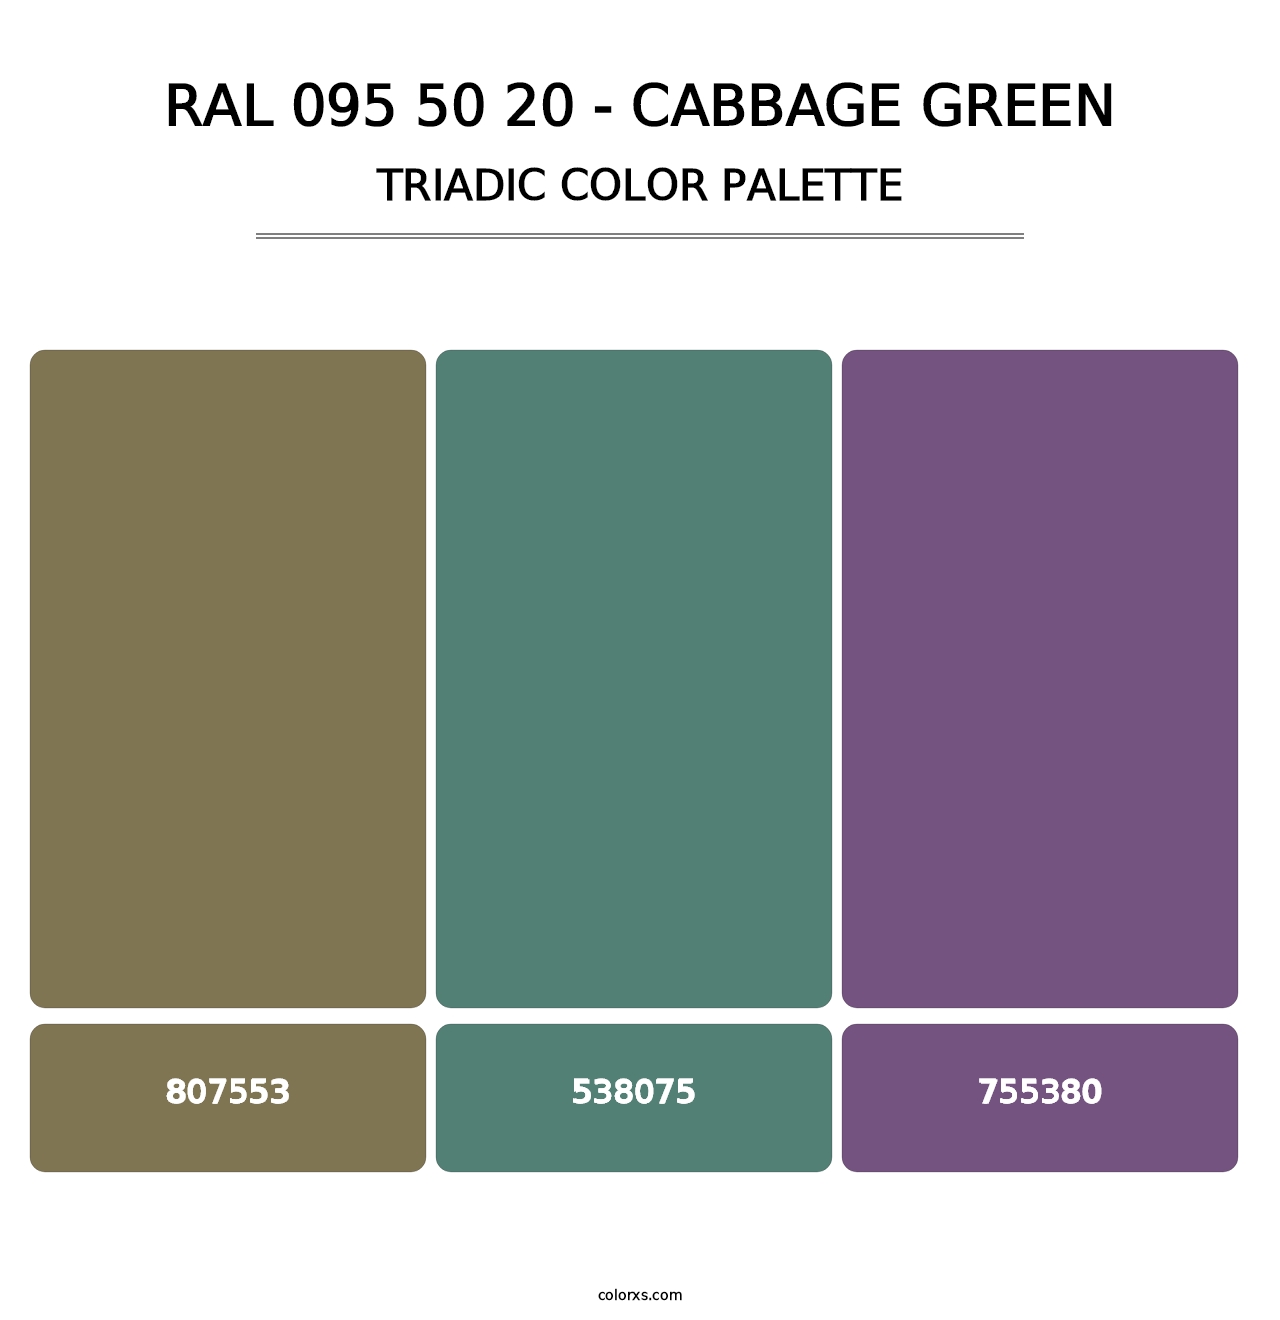 RAL 095 50 20 - Cabbage Green - Triadic Color Palette